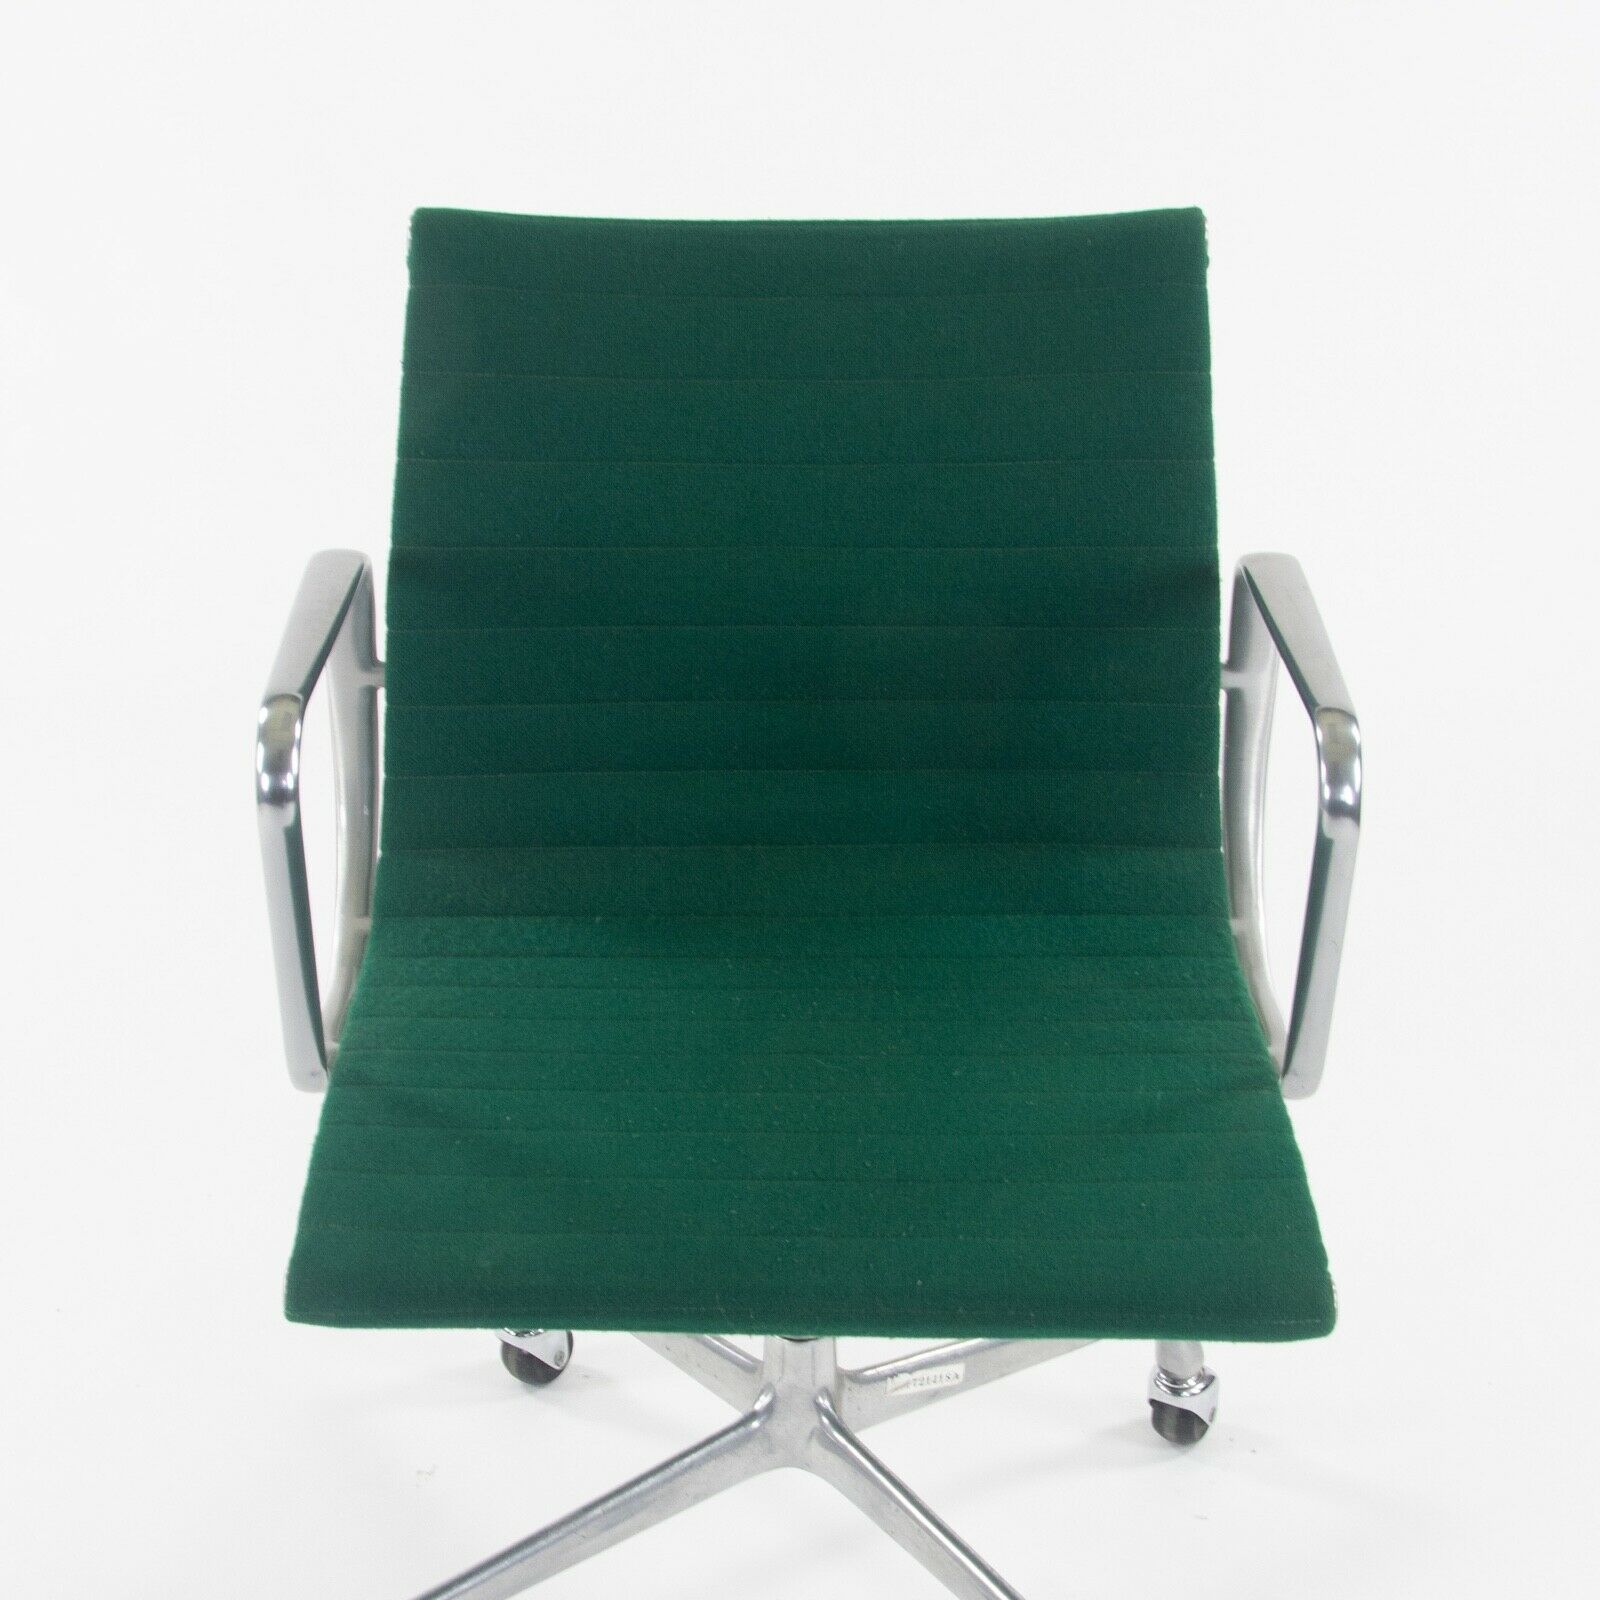 SOLD 1984 Herman Miller Eames Aluminum Group Management Desk Chair with Green Fabric